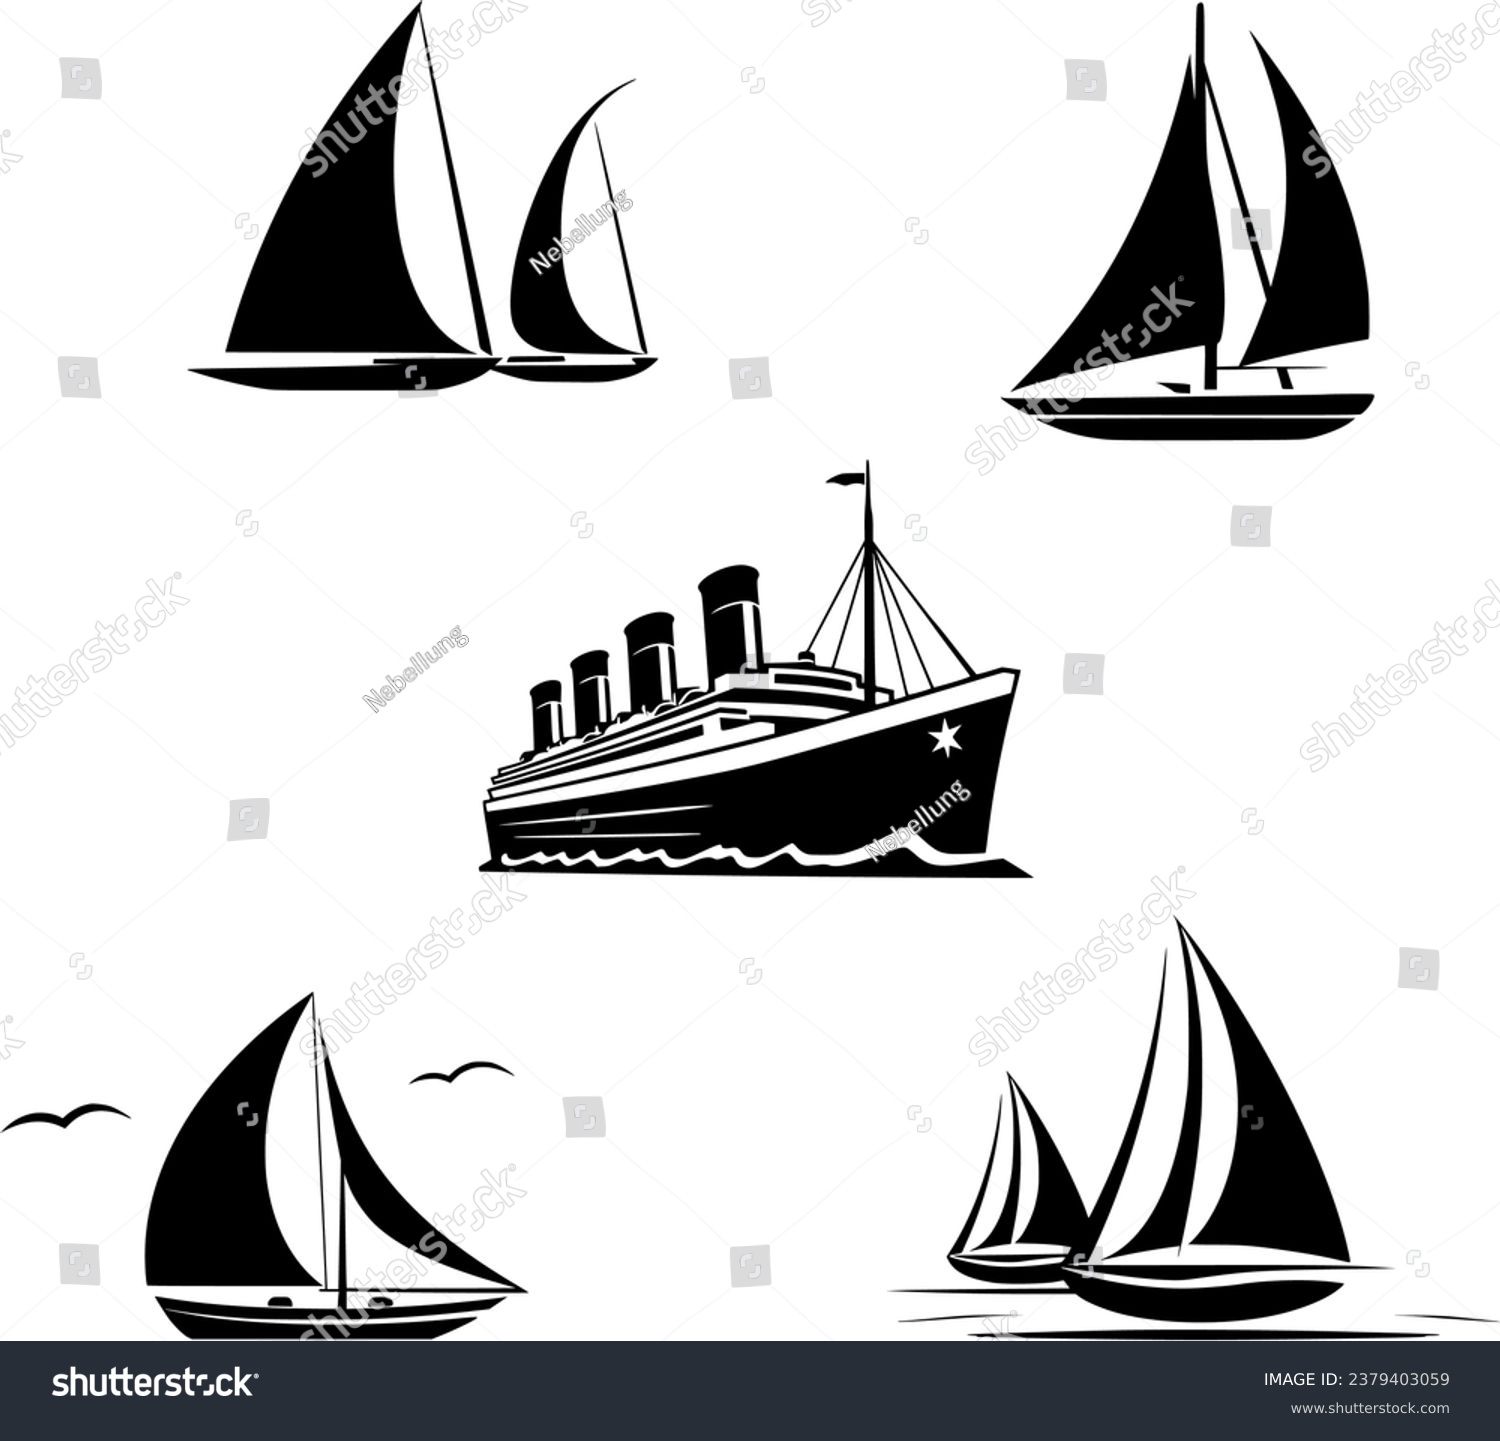 SVG of 4 sailboats in different variants. 
1 Titanic-like steamship. svg